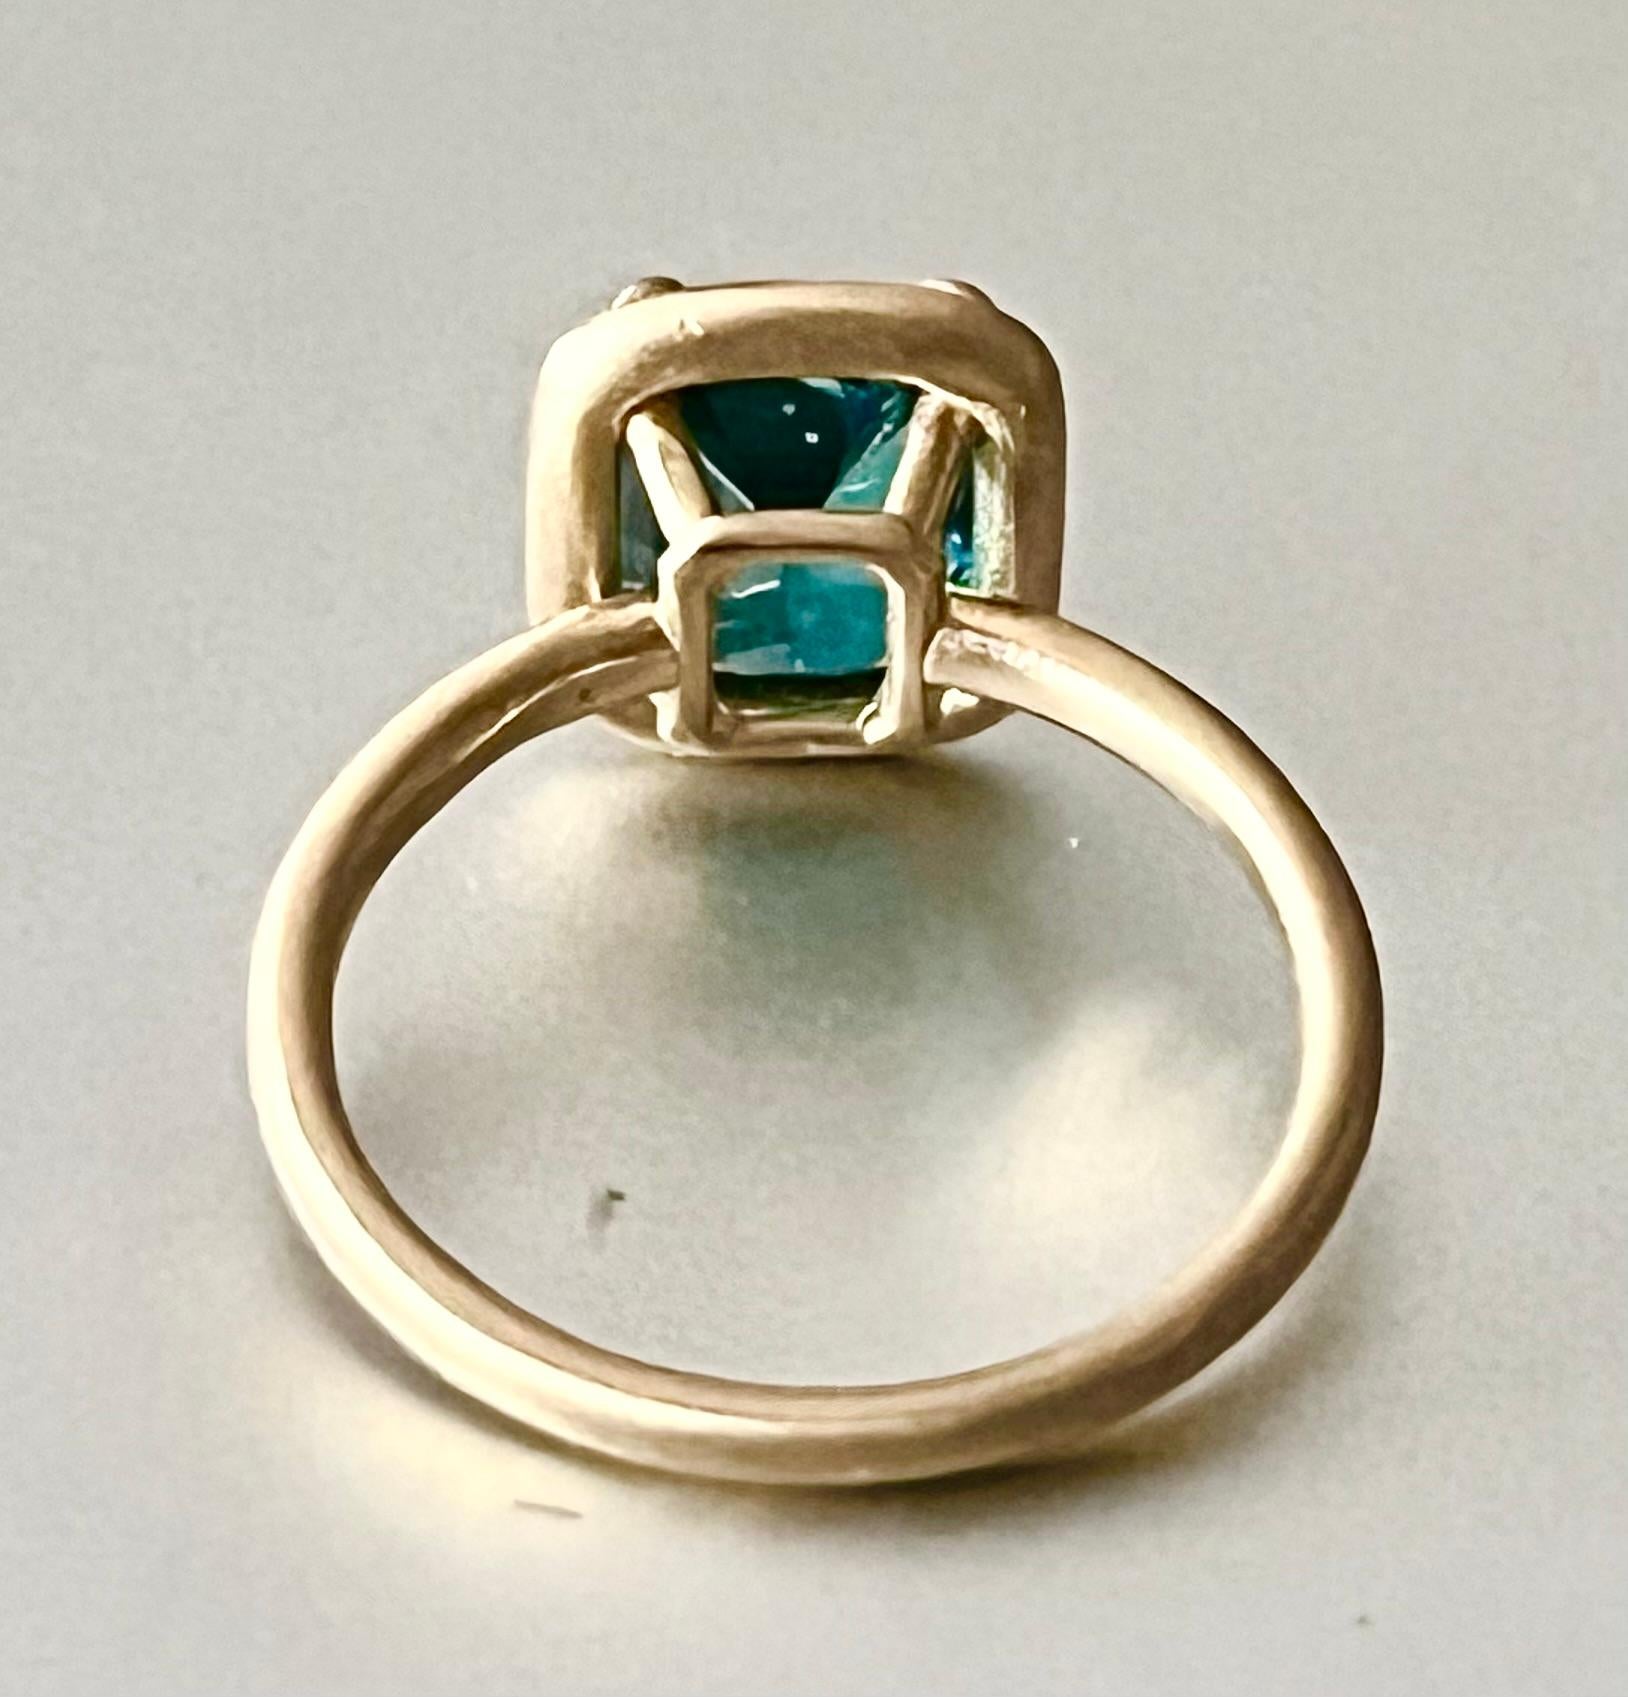 Artisan AAA Indicolite 18K Gold Ring one of a kind, sizable 6 